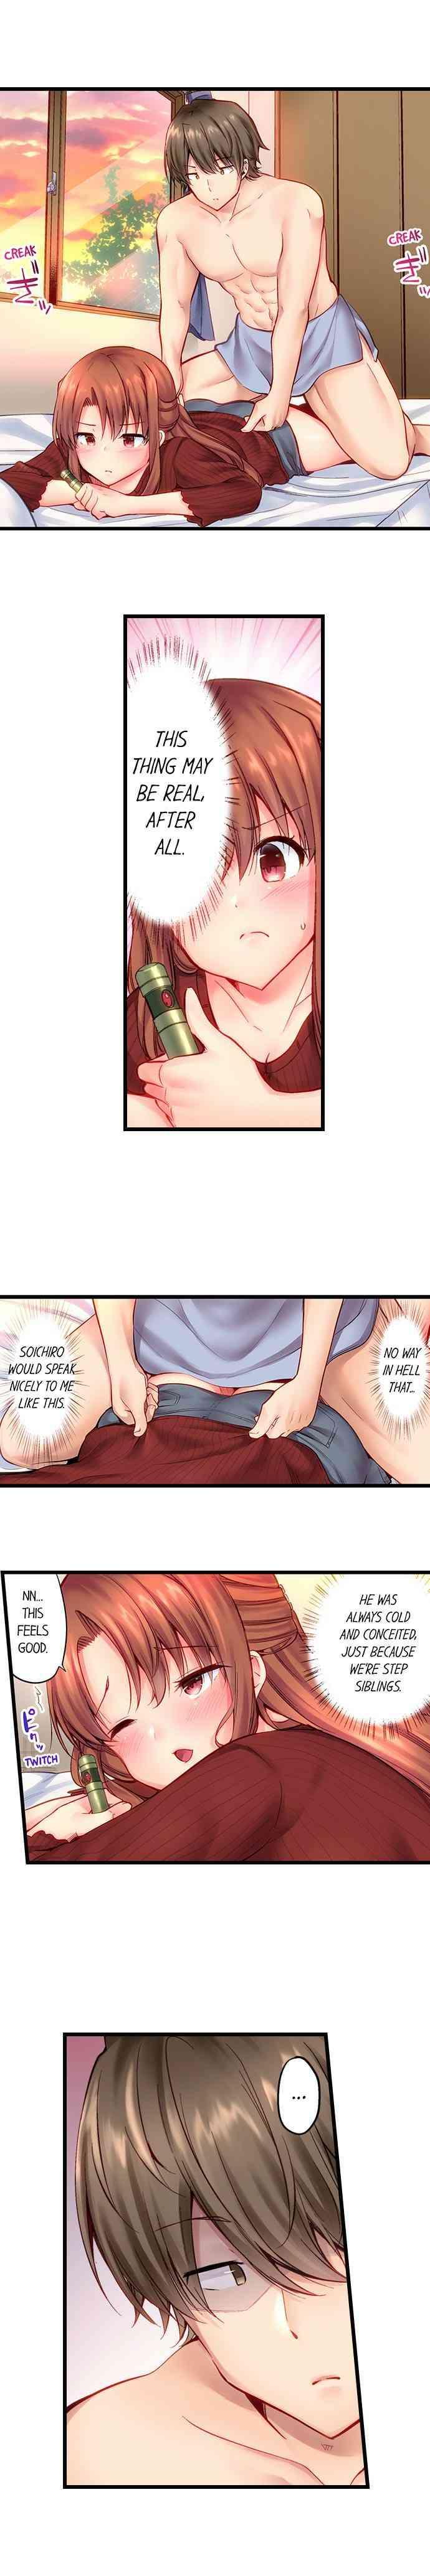 Analsex "Hypnotized" Sex with My Brother Ch.21/? Amante - Page 10